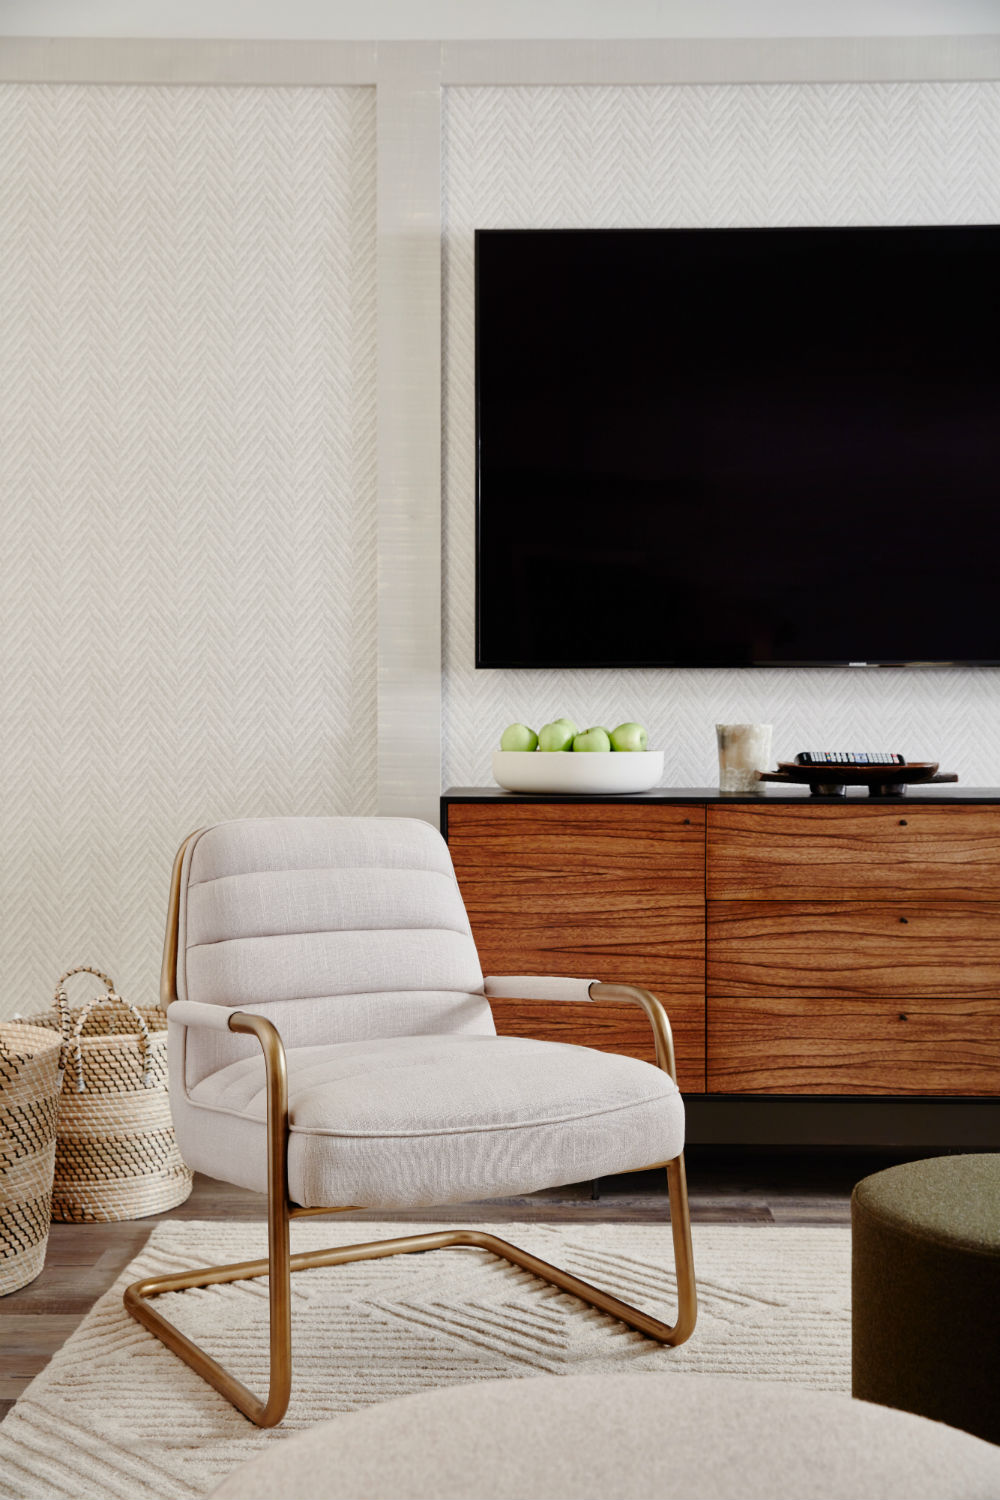 Textured white walls and a mid century modern armchair